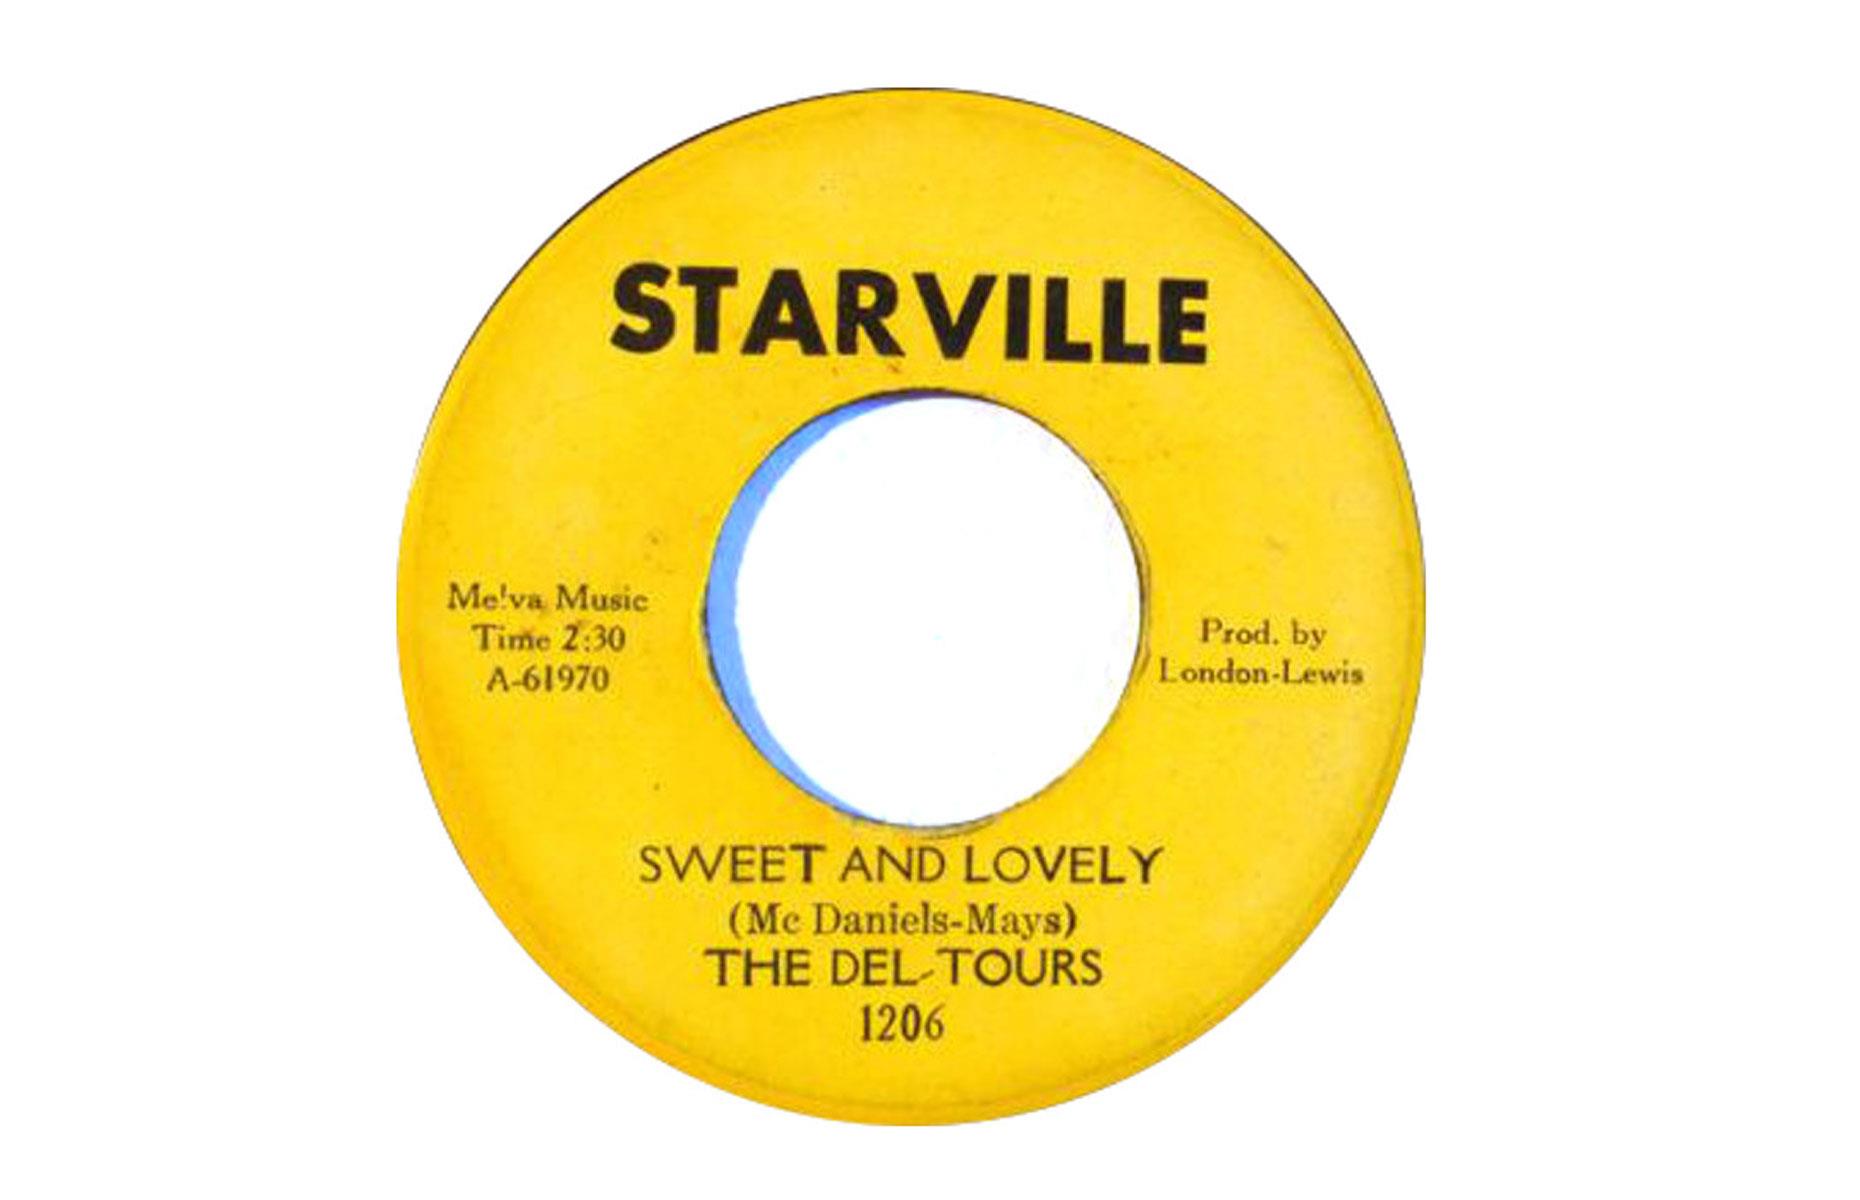 The Del Tours – Sweet and Lovely: up to $4,000 (£3,398)